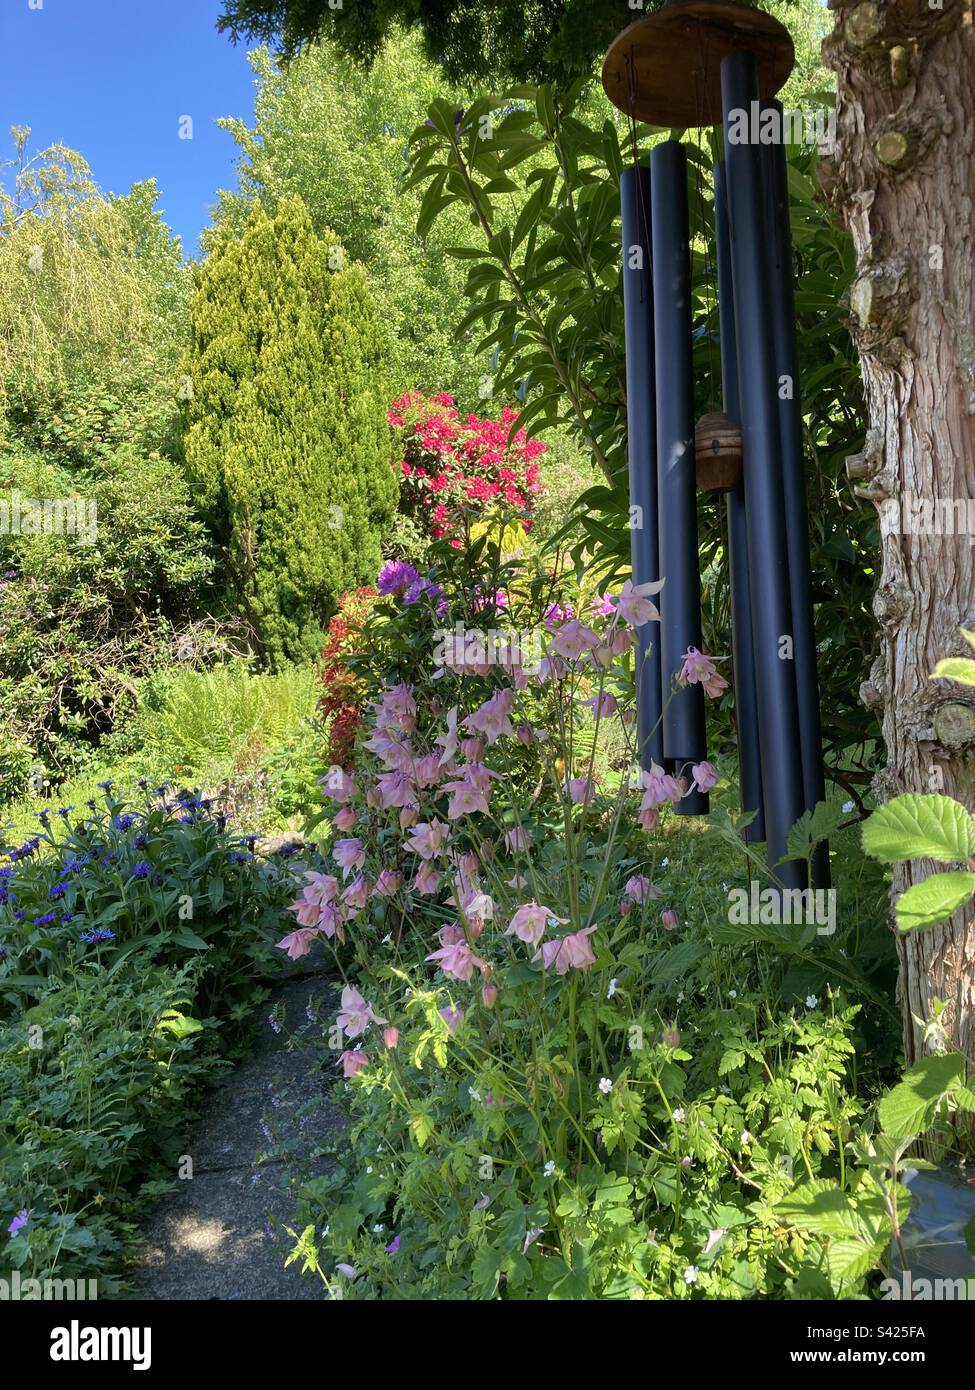 Large wind chime with flowering shrubs Stock Photo